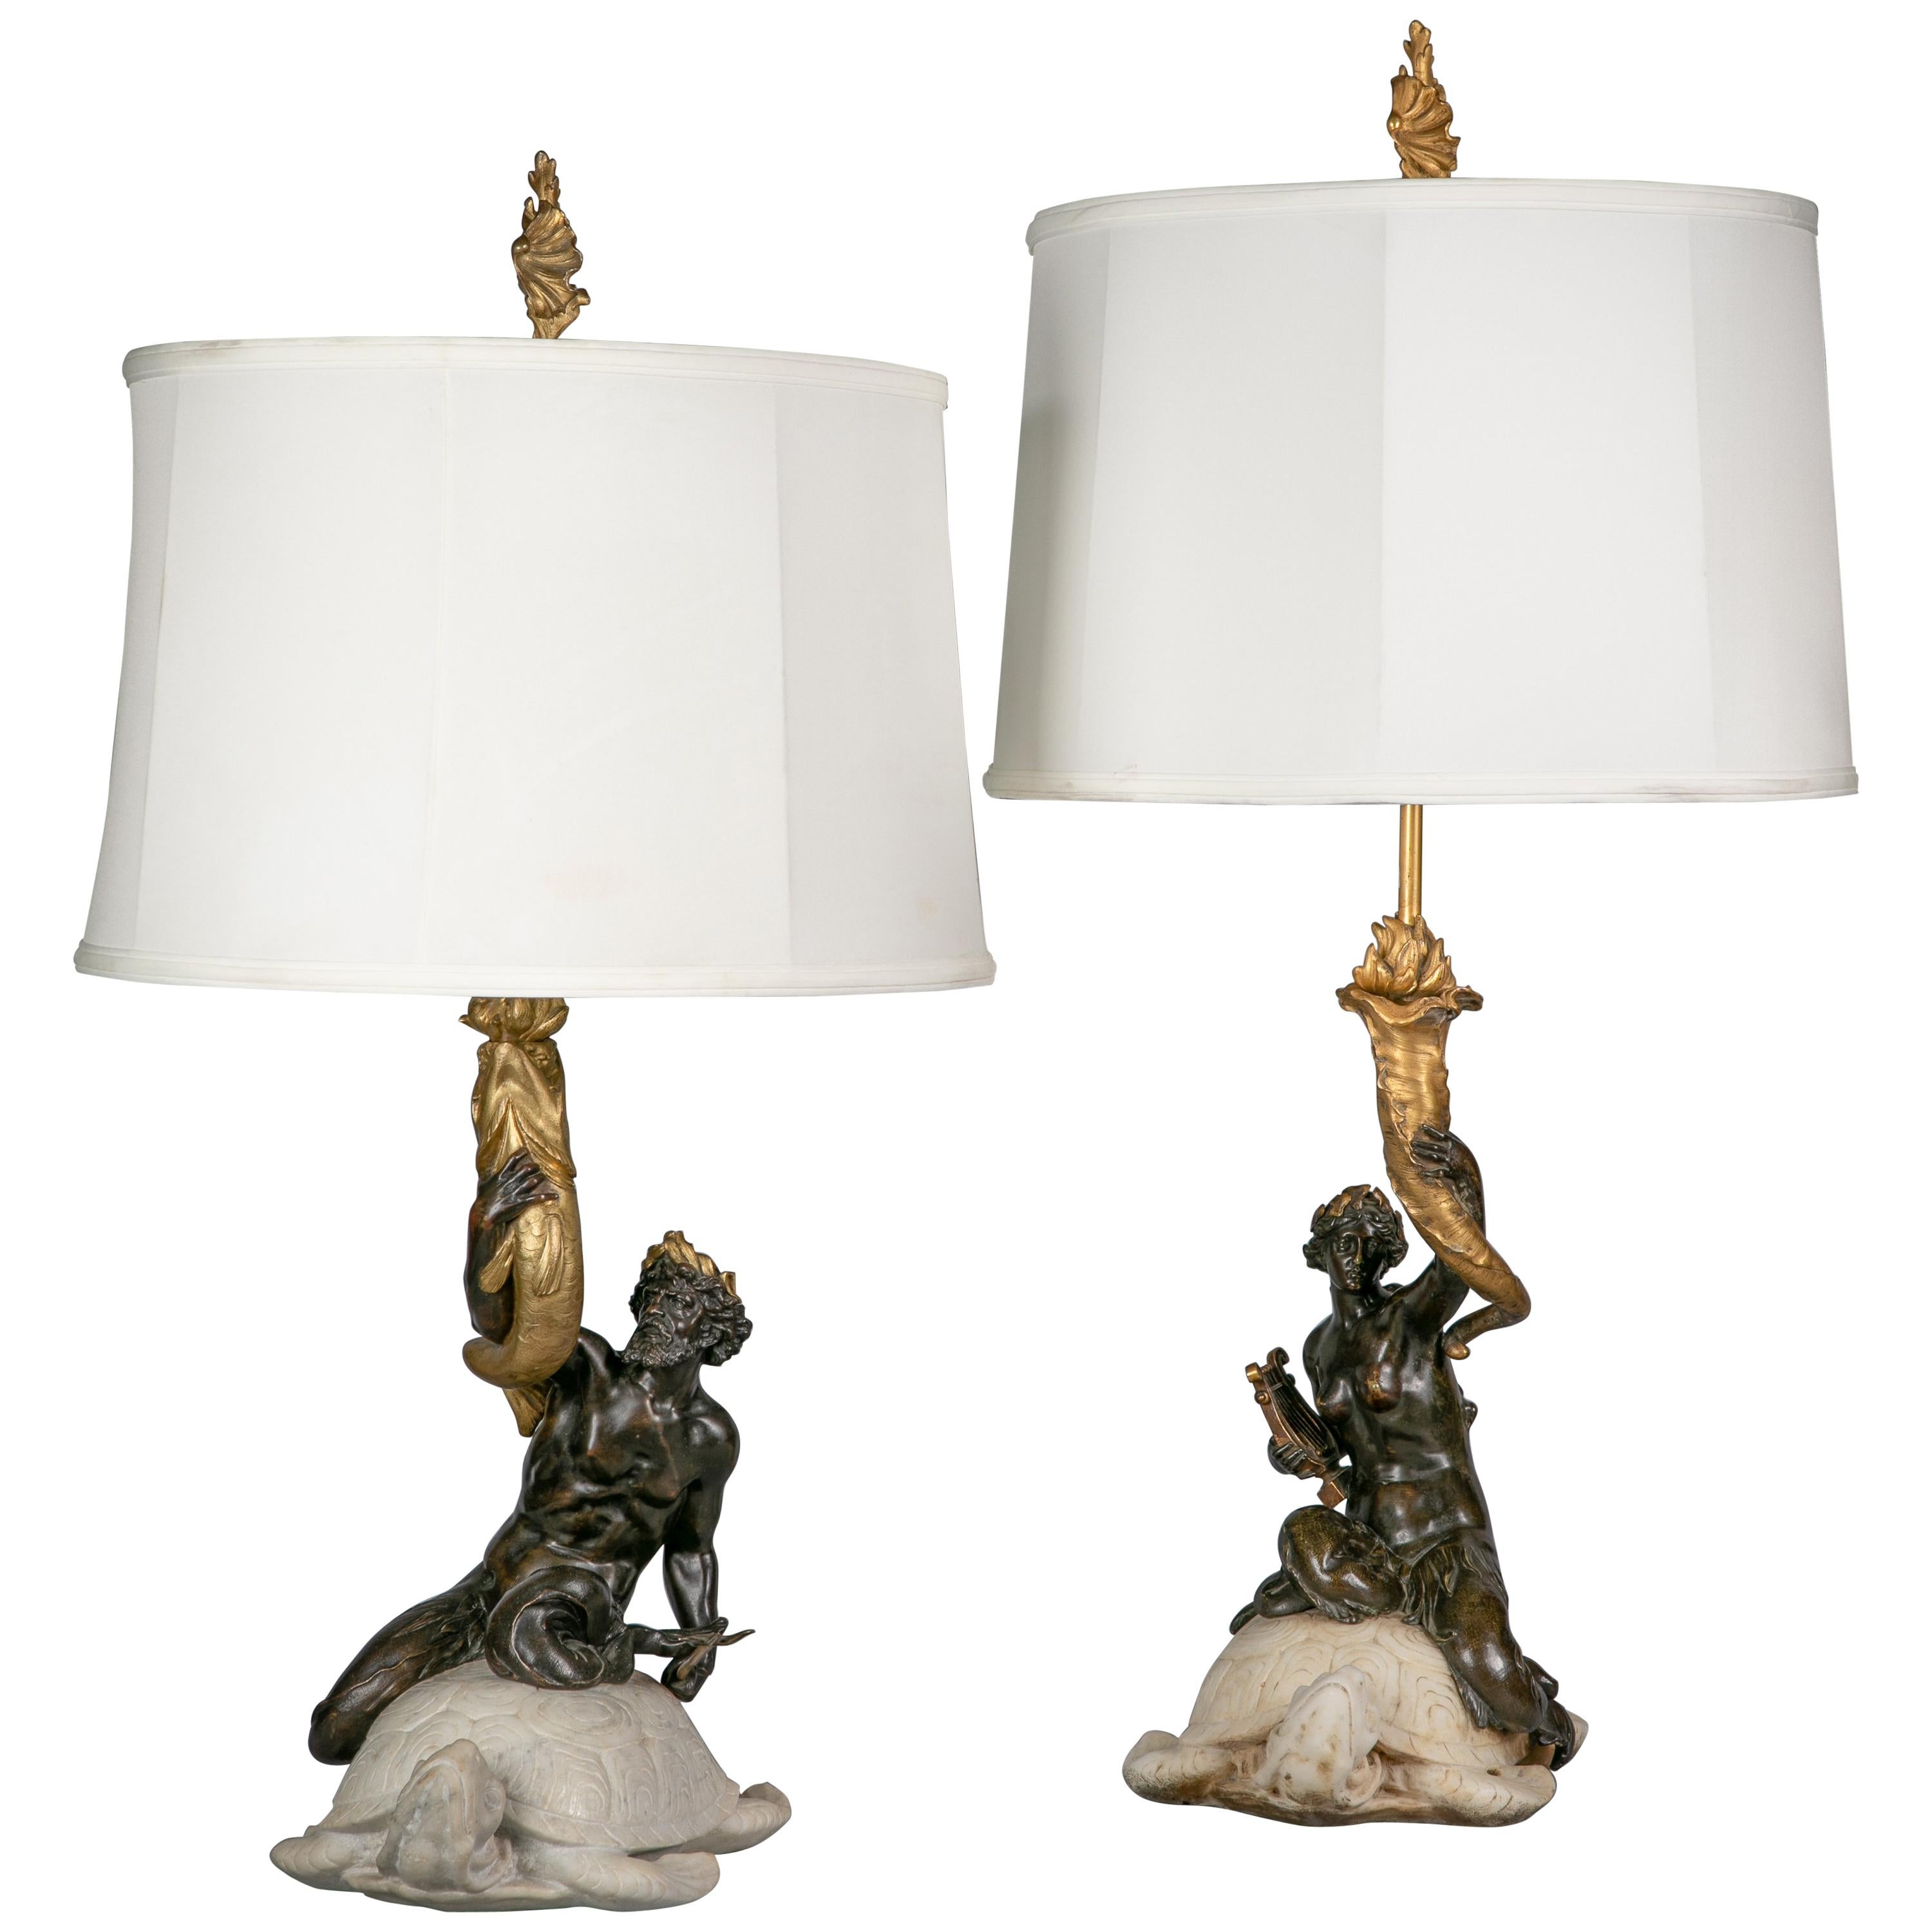 Two American Bronze and Marble Table Lamps, E.F. Caldwell, circa 1915